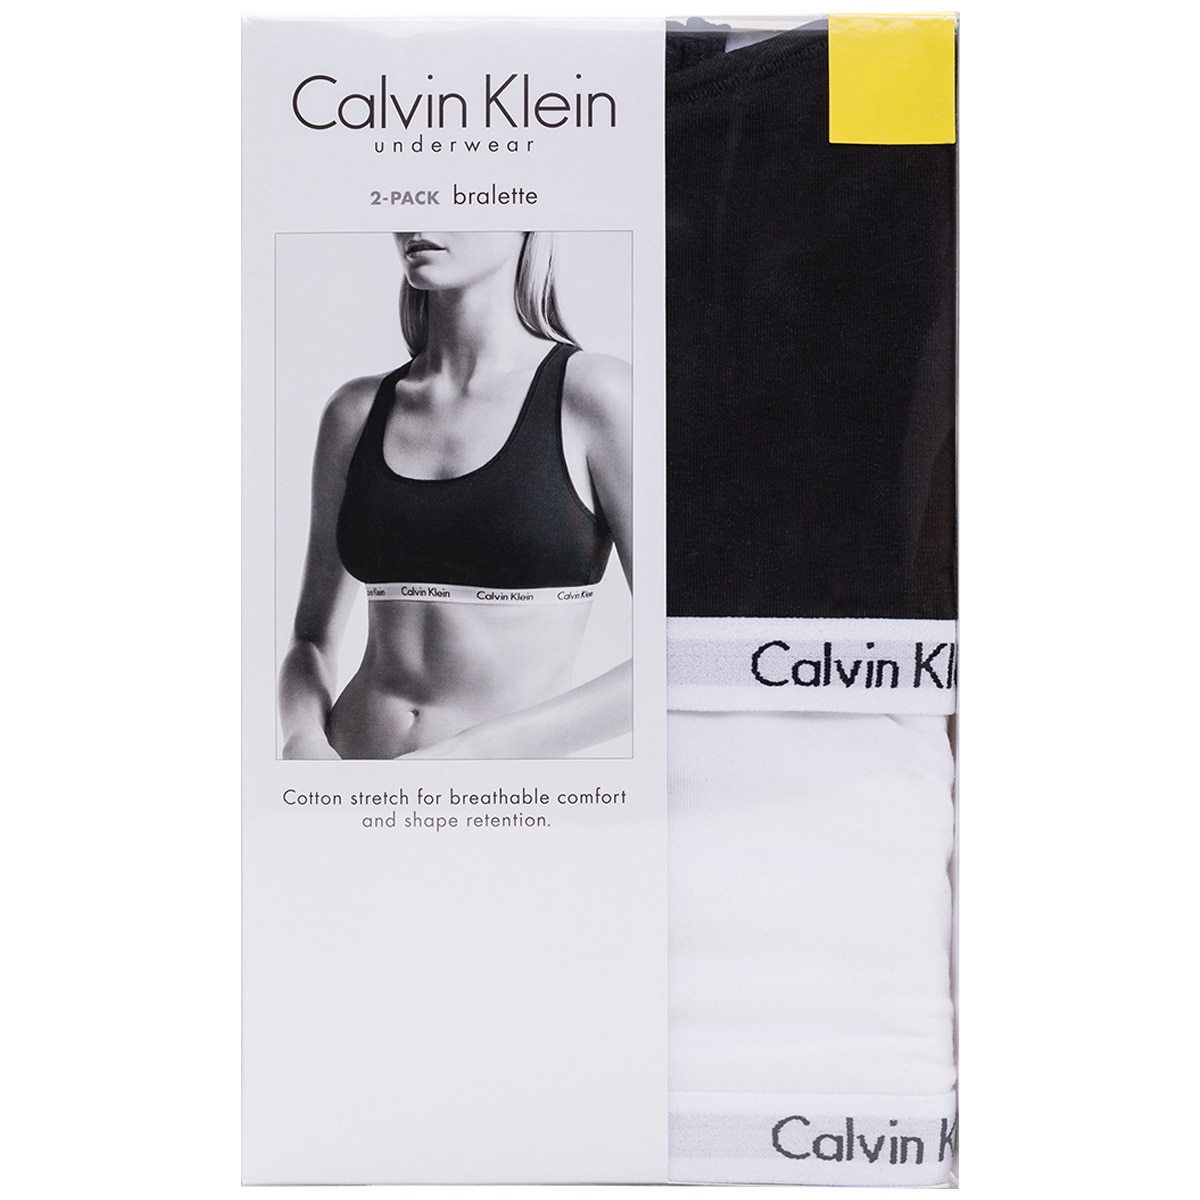 New Model 2022) Set Of 2 Rimless Calvin Klein Bras Purchased At Us Costco